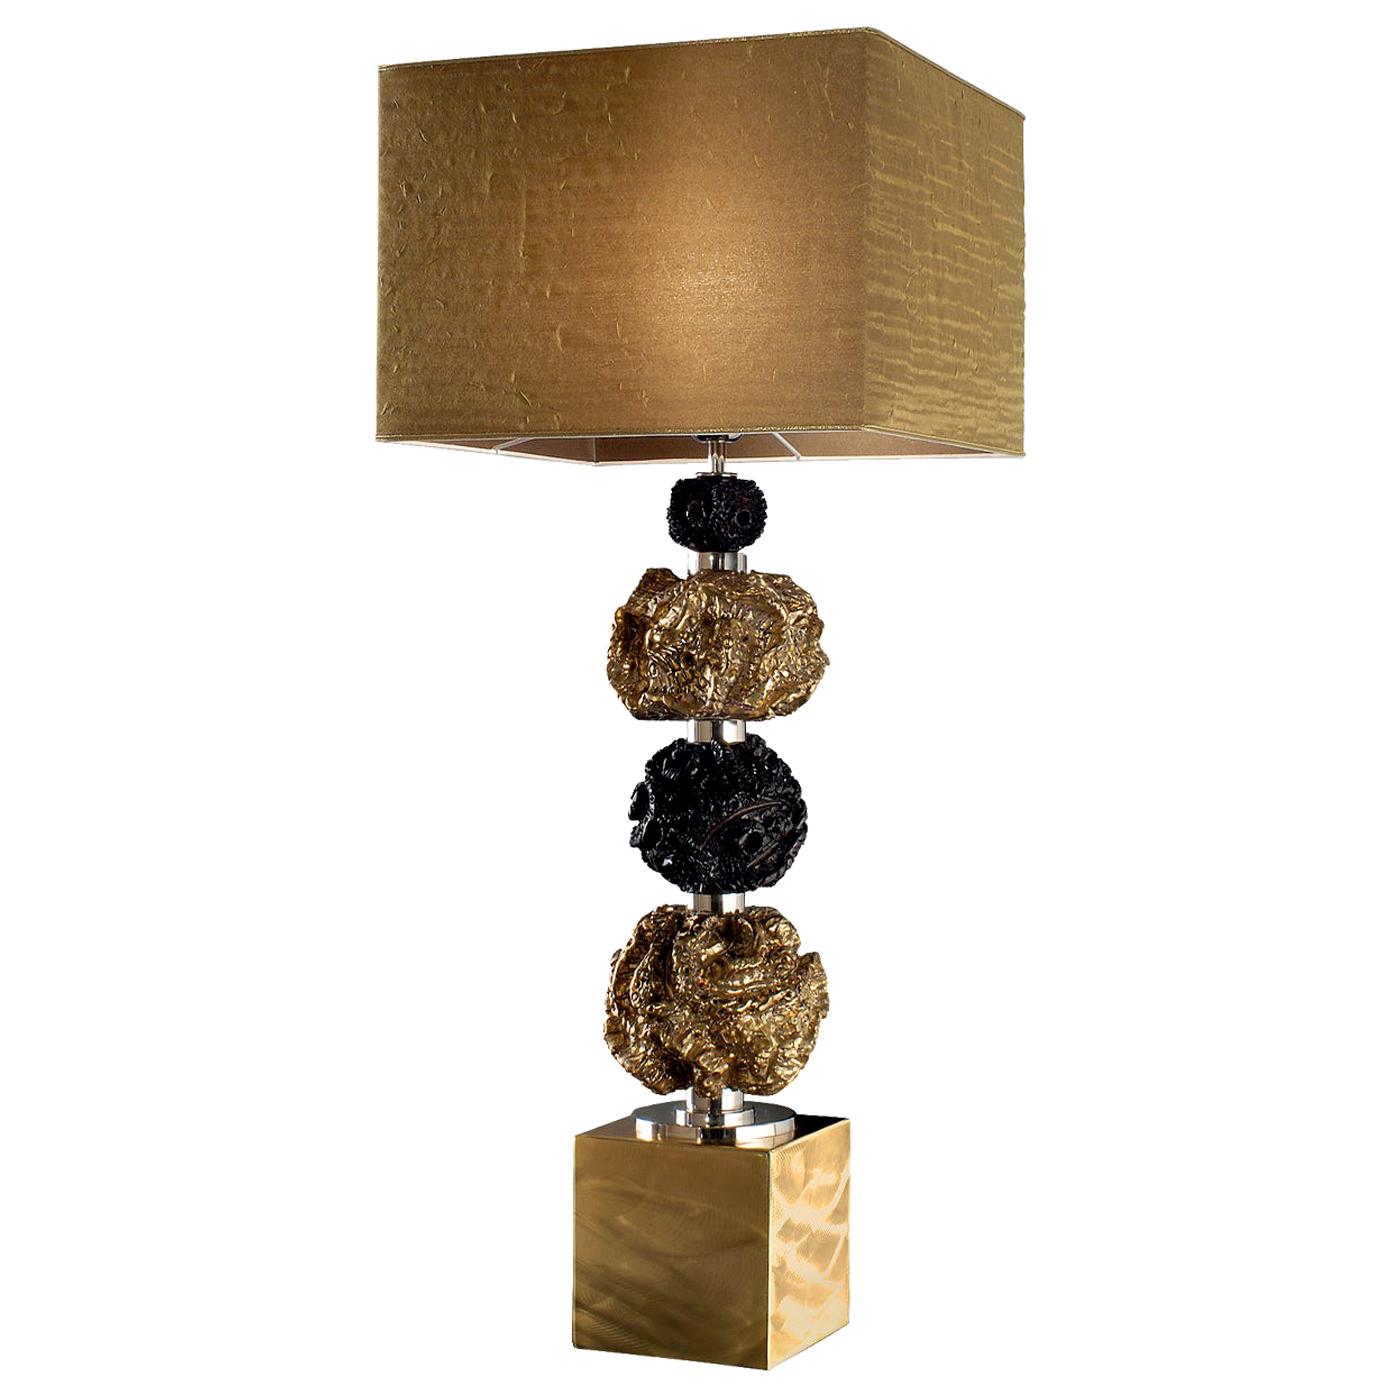 CL1833 Gold-Plated Triple Globe Lamp